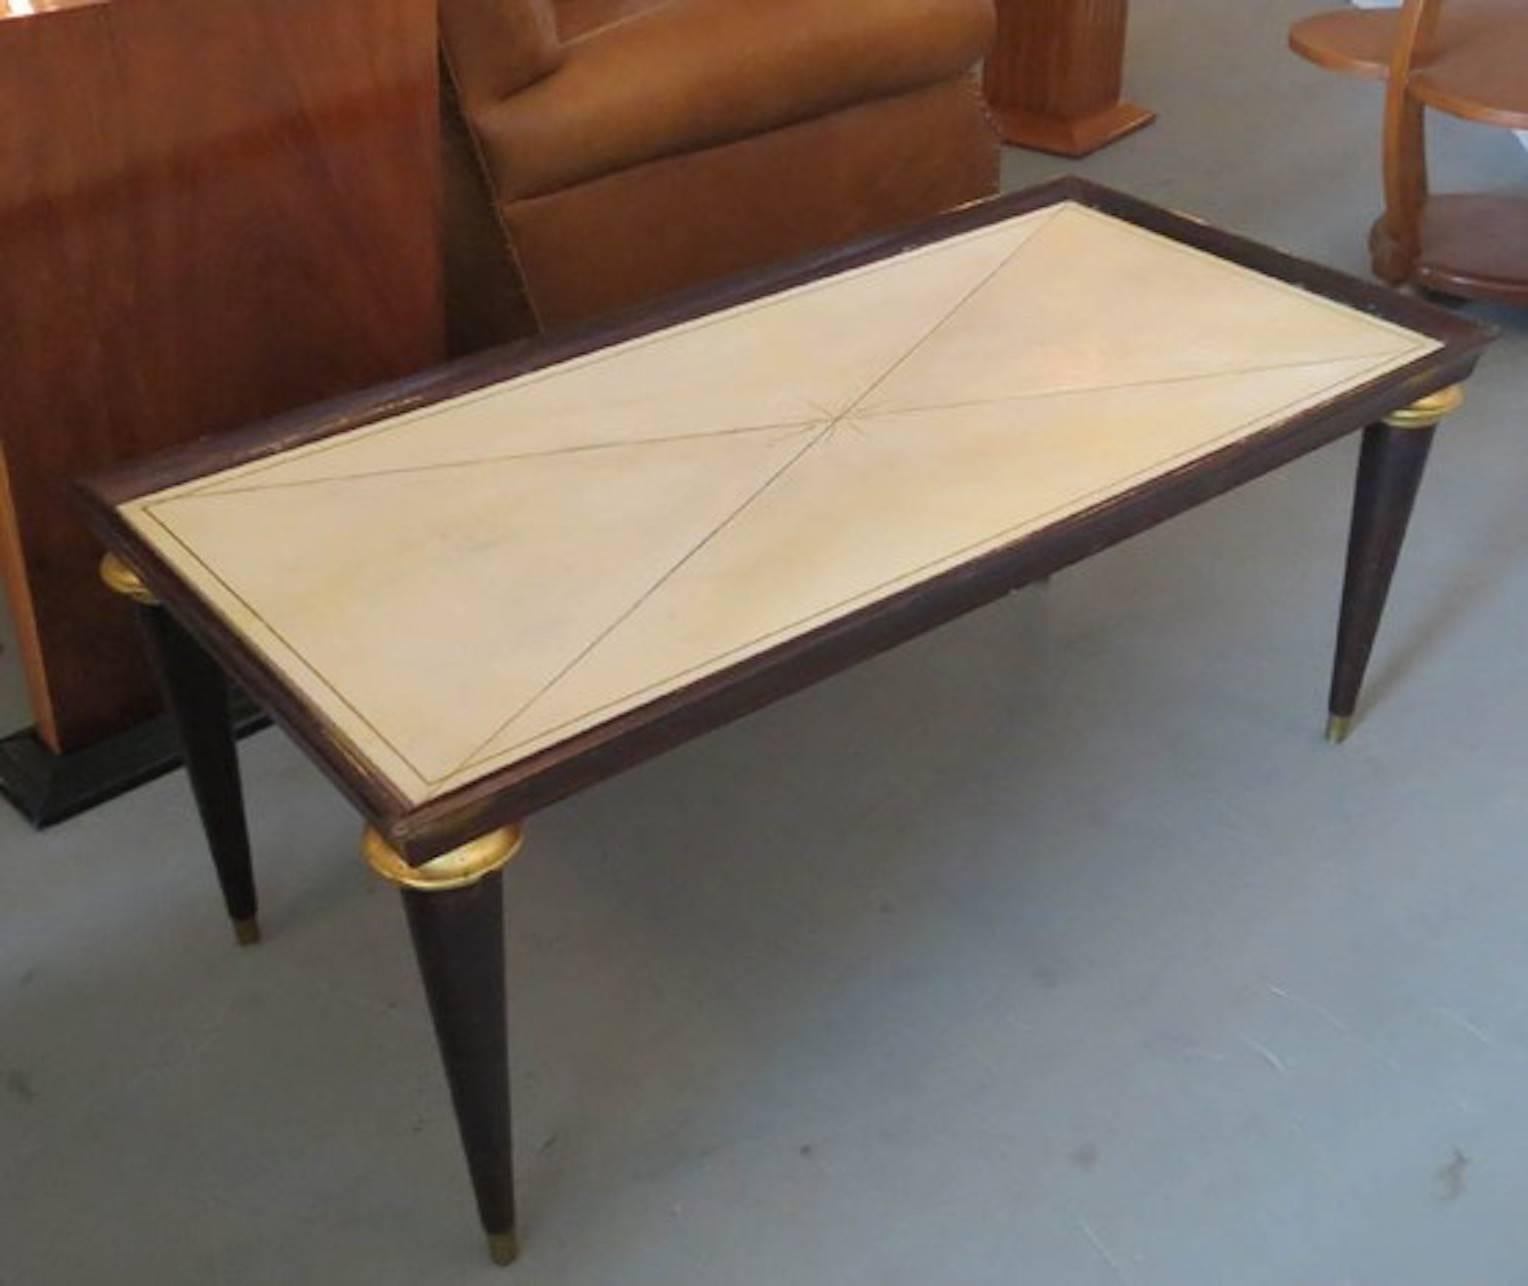 This French Art Deco coffee table is from Maison Jansen. The 1940s table is constructed of stained oak with gold leaf collars above the leg. The parchment table bed has a decorative 1940s design and feet are brass tipped the parchment has a glass